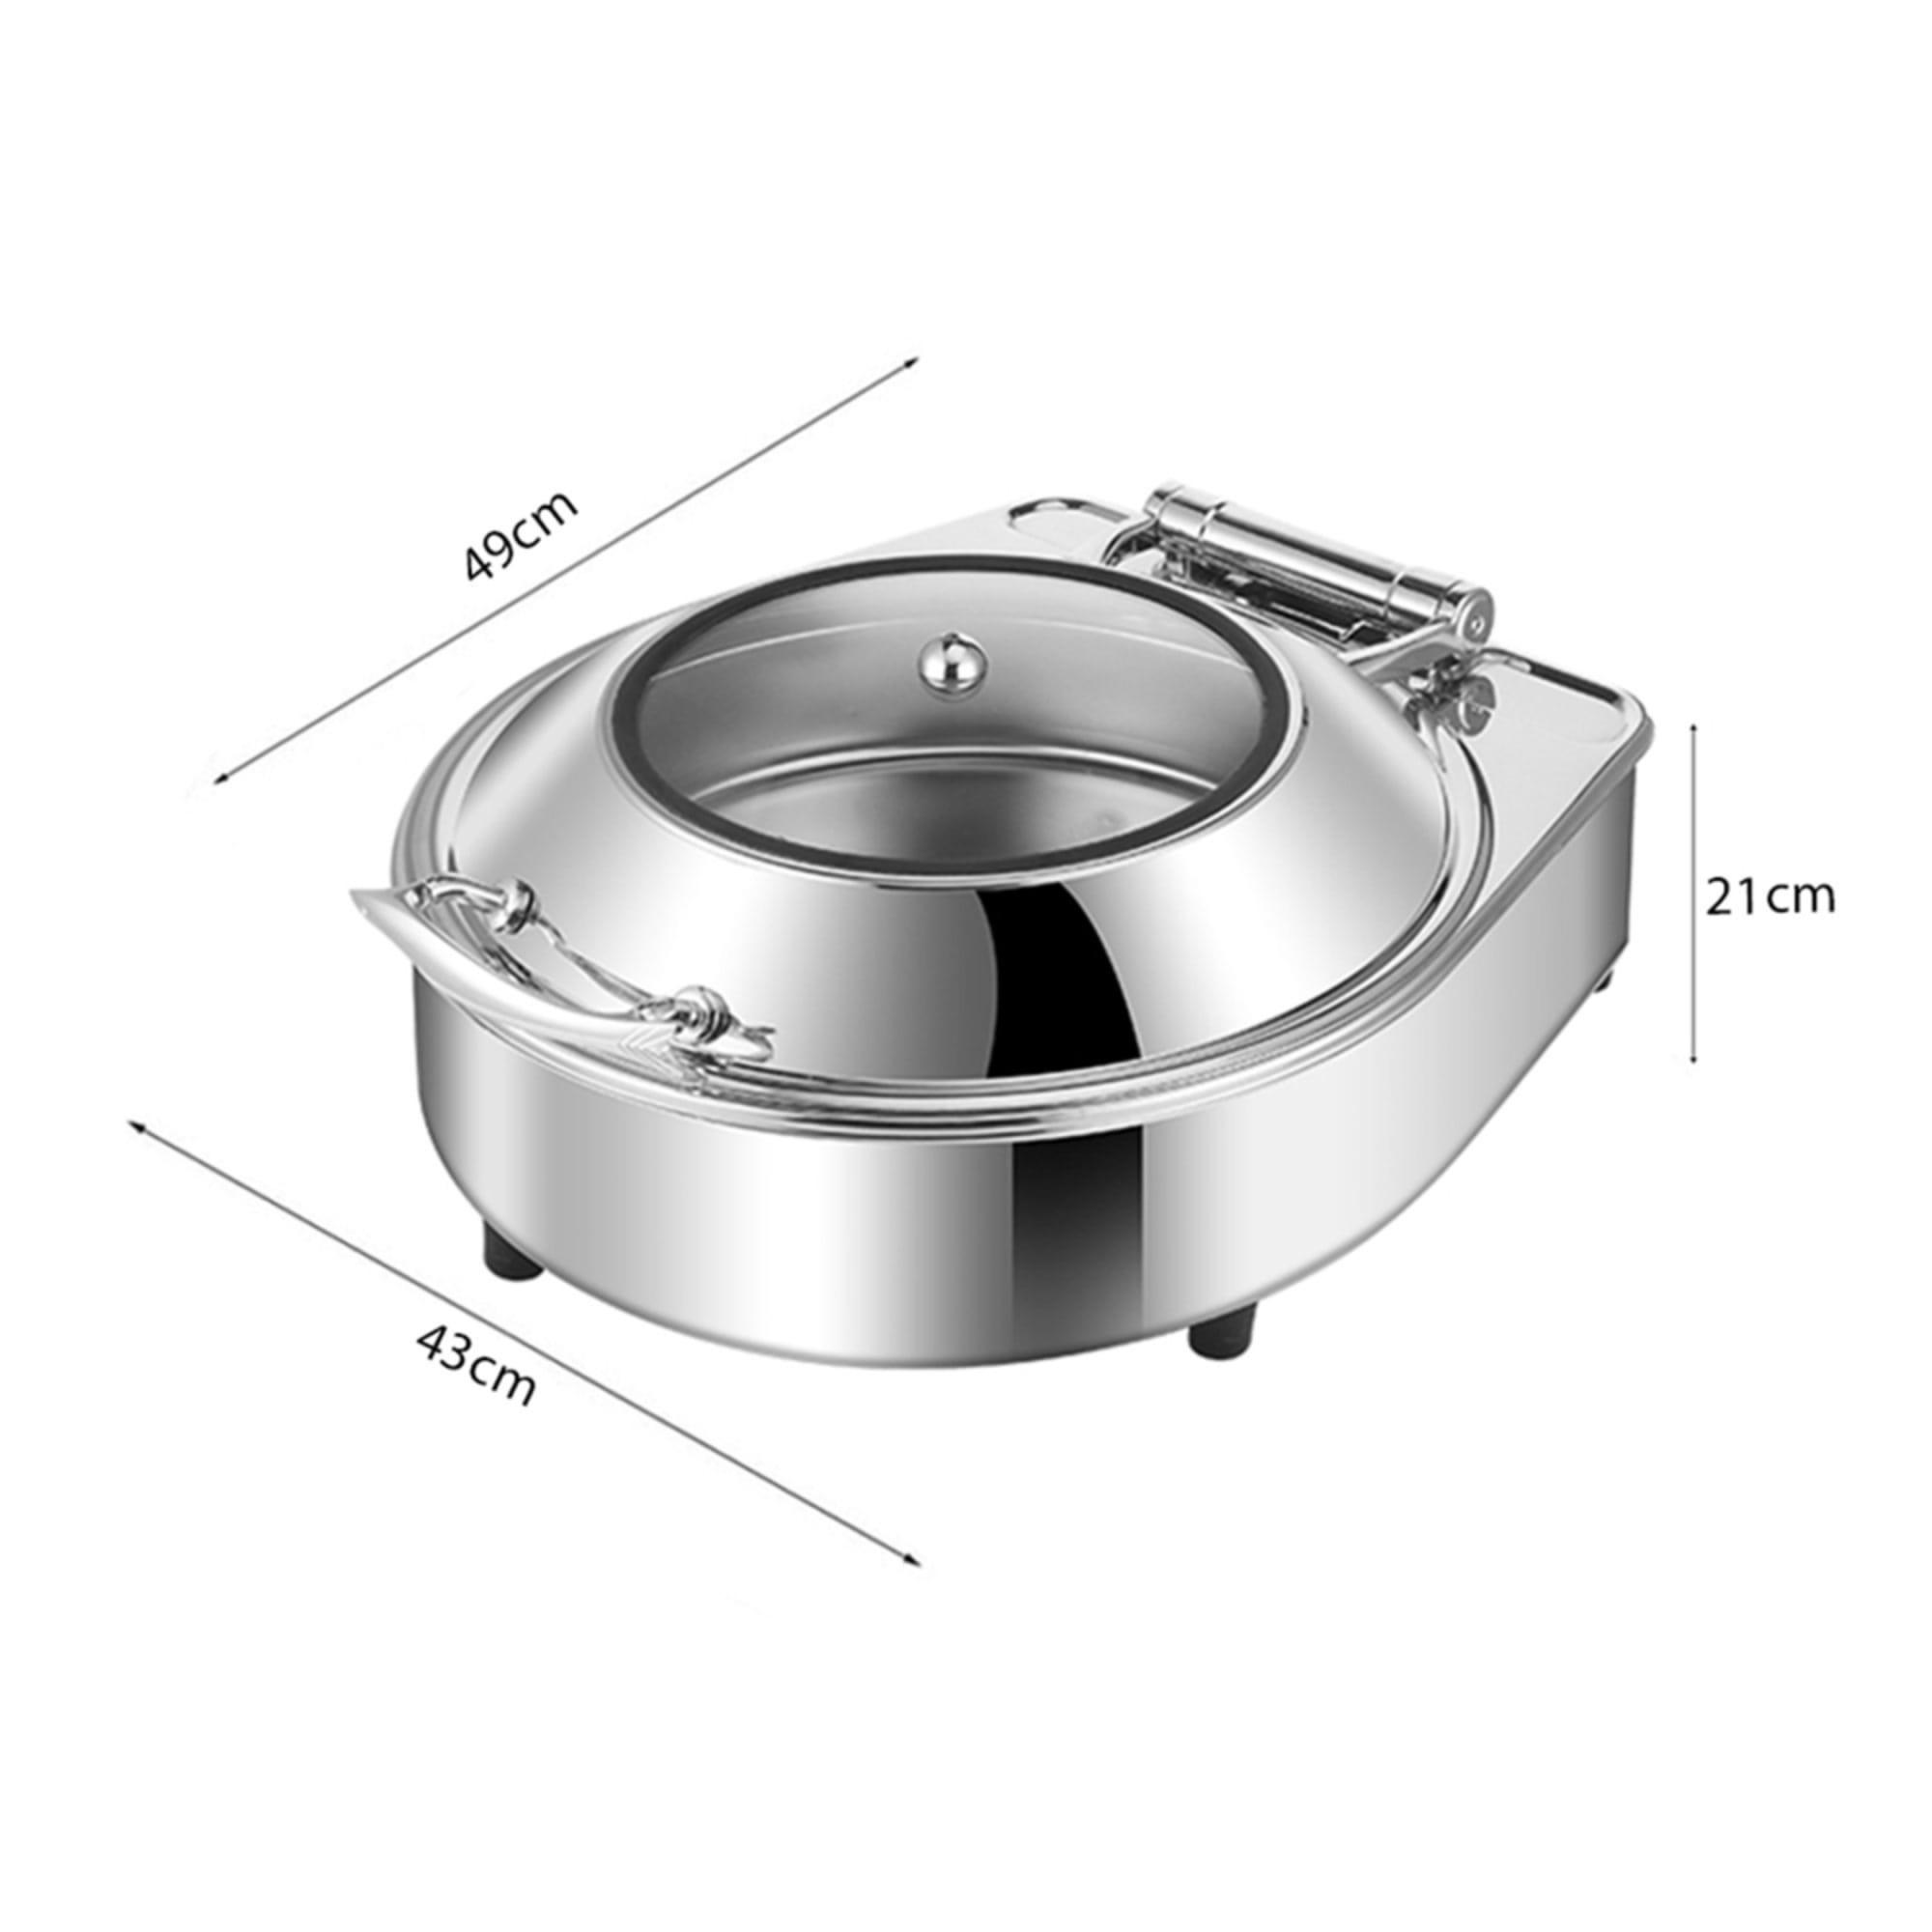 Soga Round Stainless Steel Chafing Dish with Top Lid Image 5